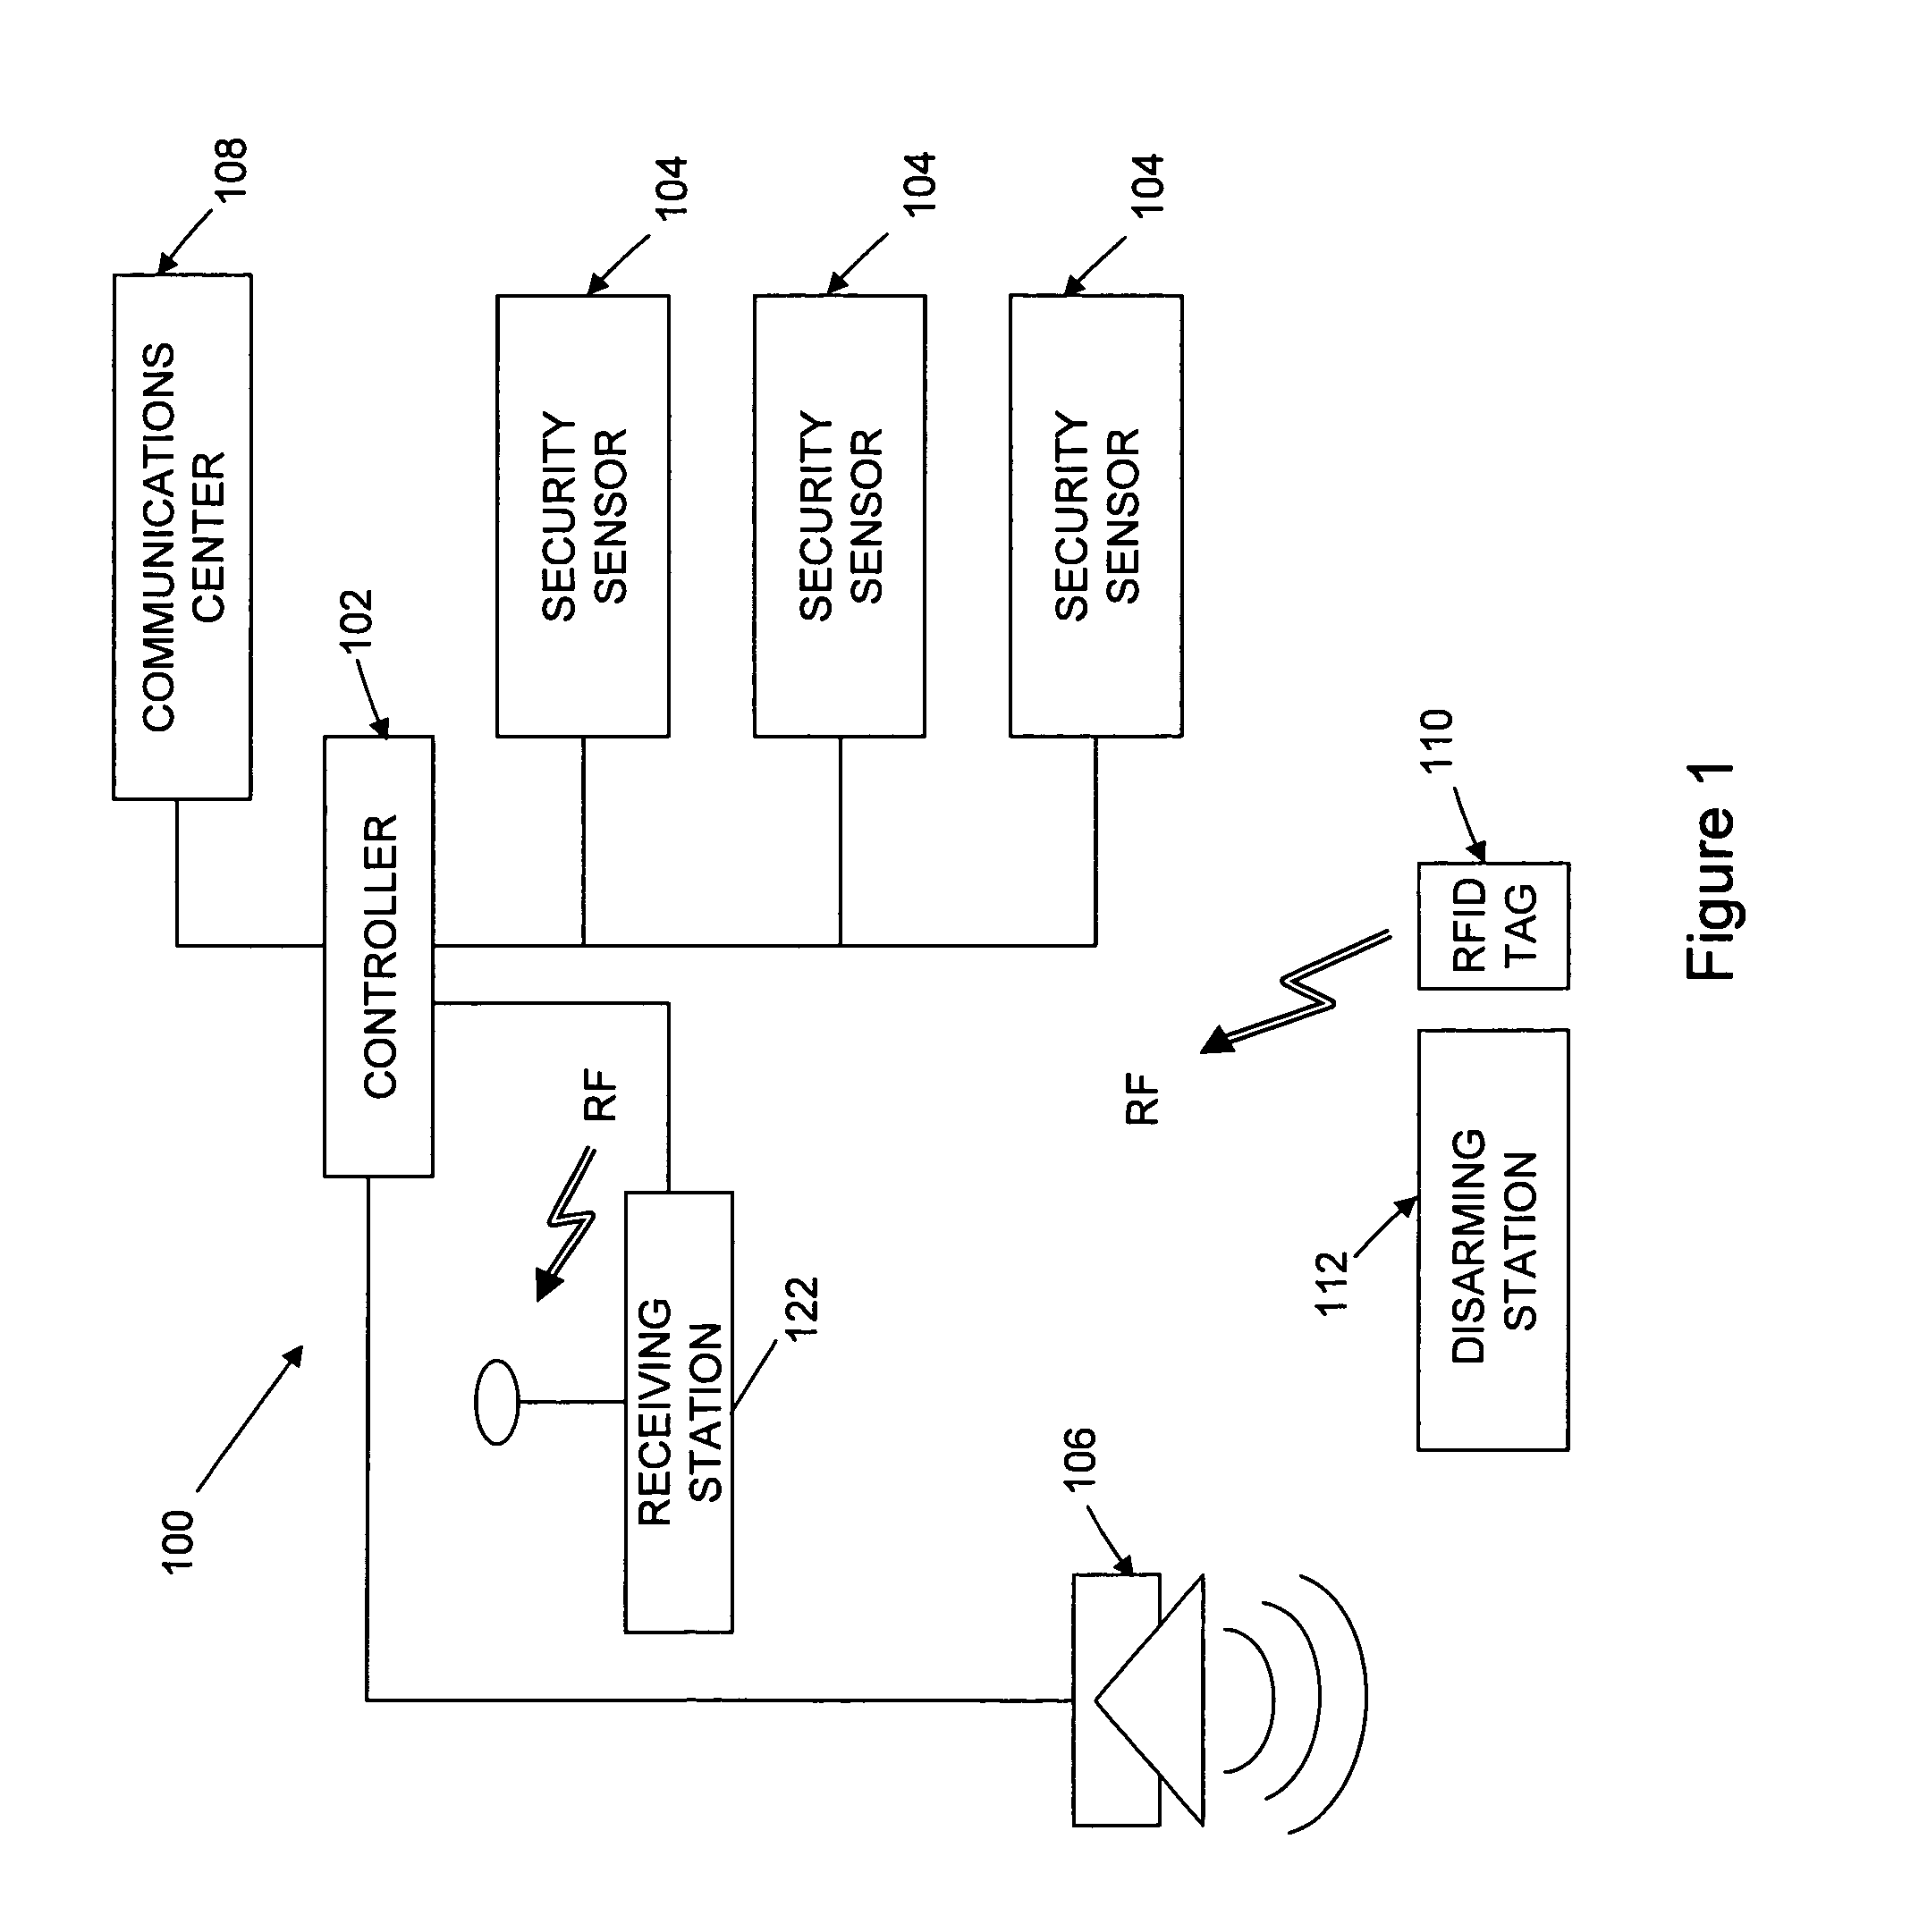 Method and apparatus for magnetically activated radio or infrared identification system